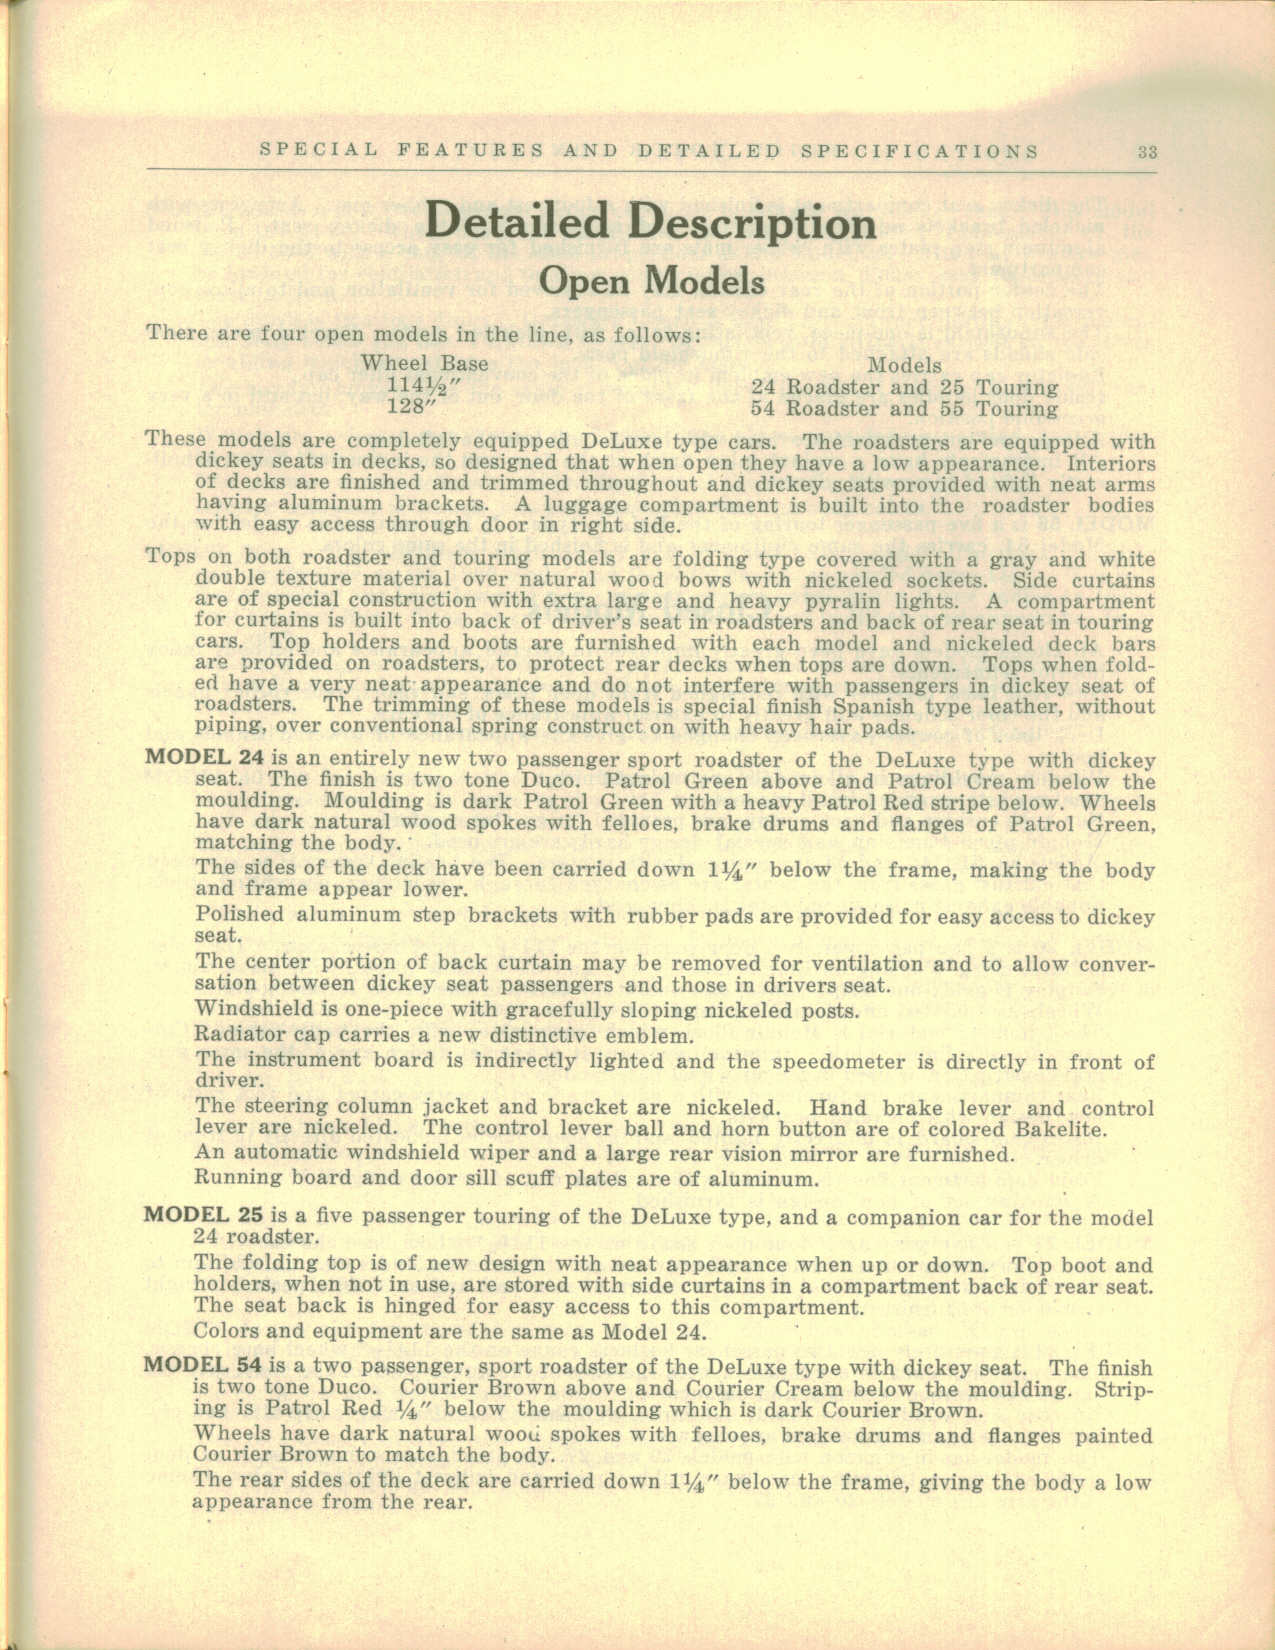 1927 Buick Special Features and Specs-33